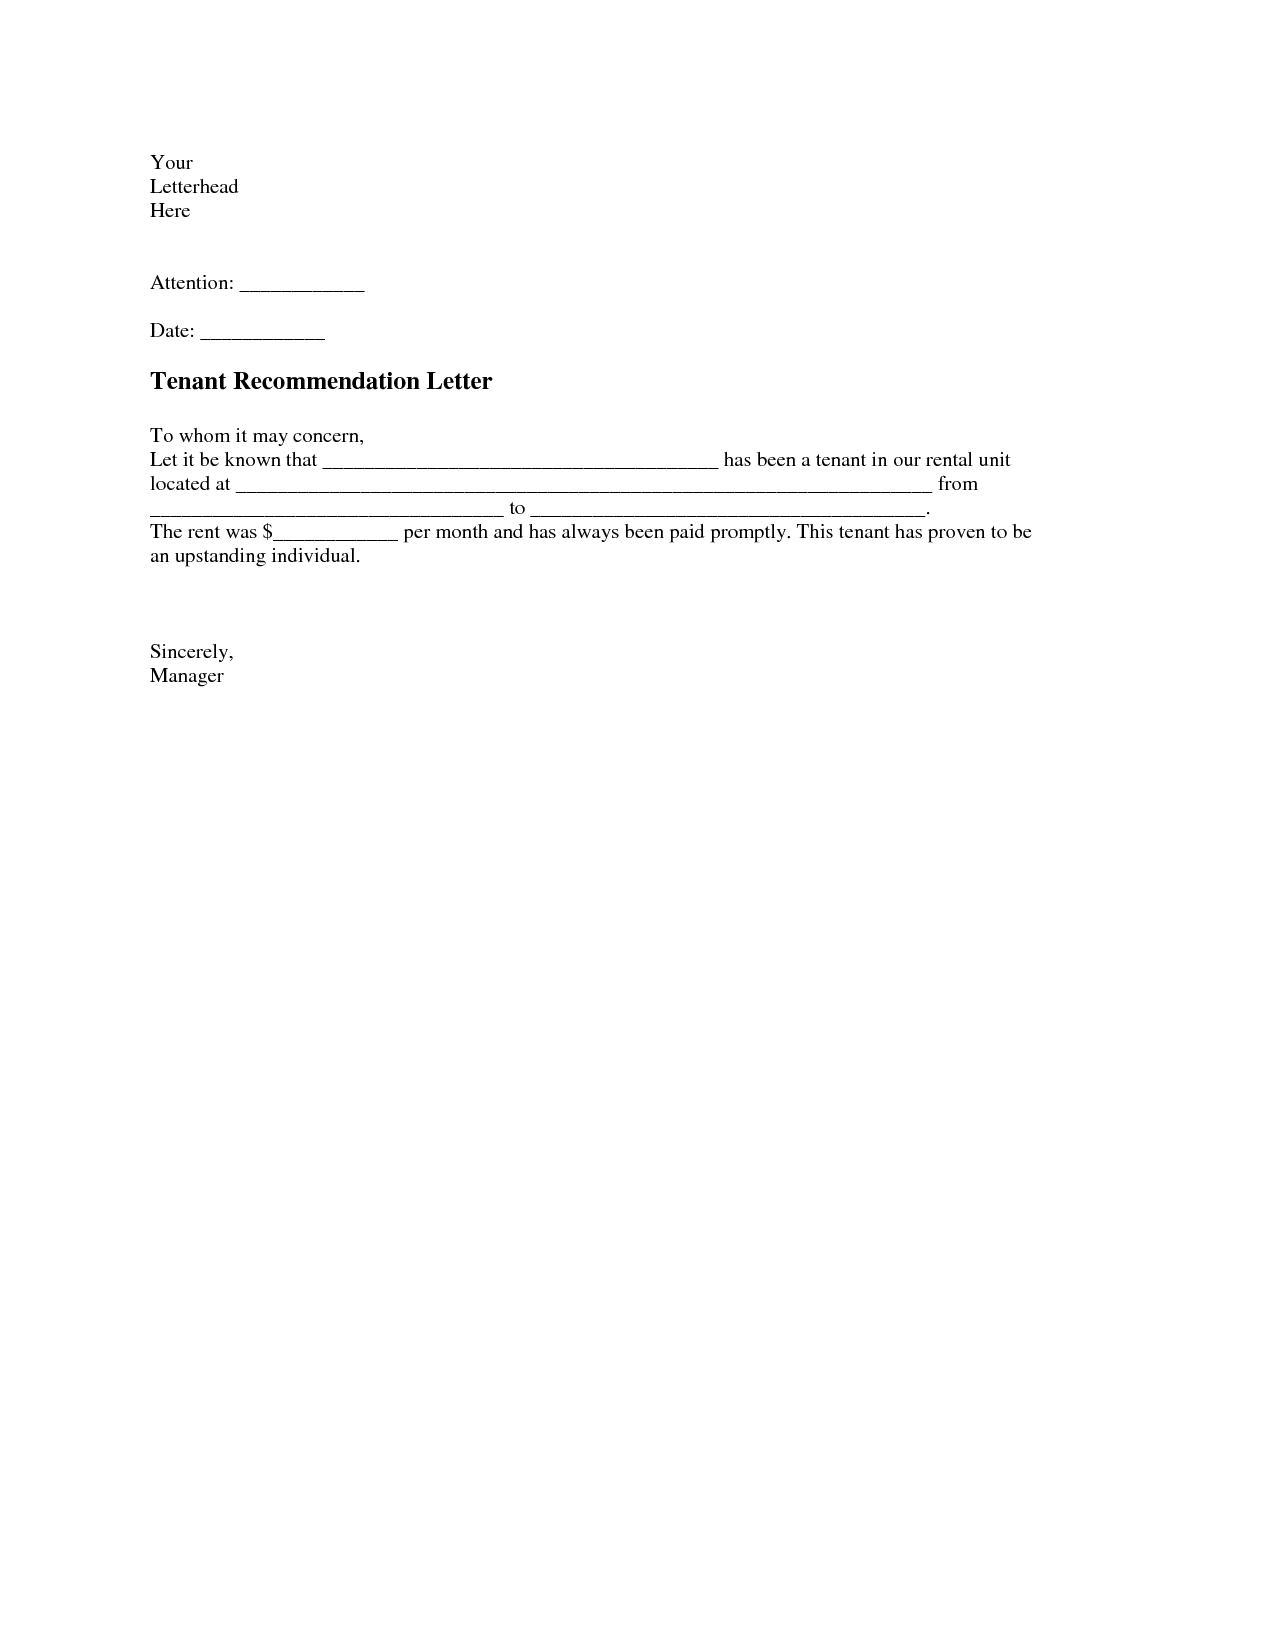 Tenant Recommendation Letter A Tenant Recommendation inside size 1275 X 1650